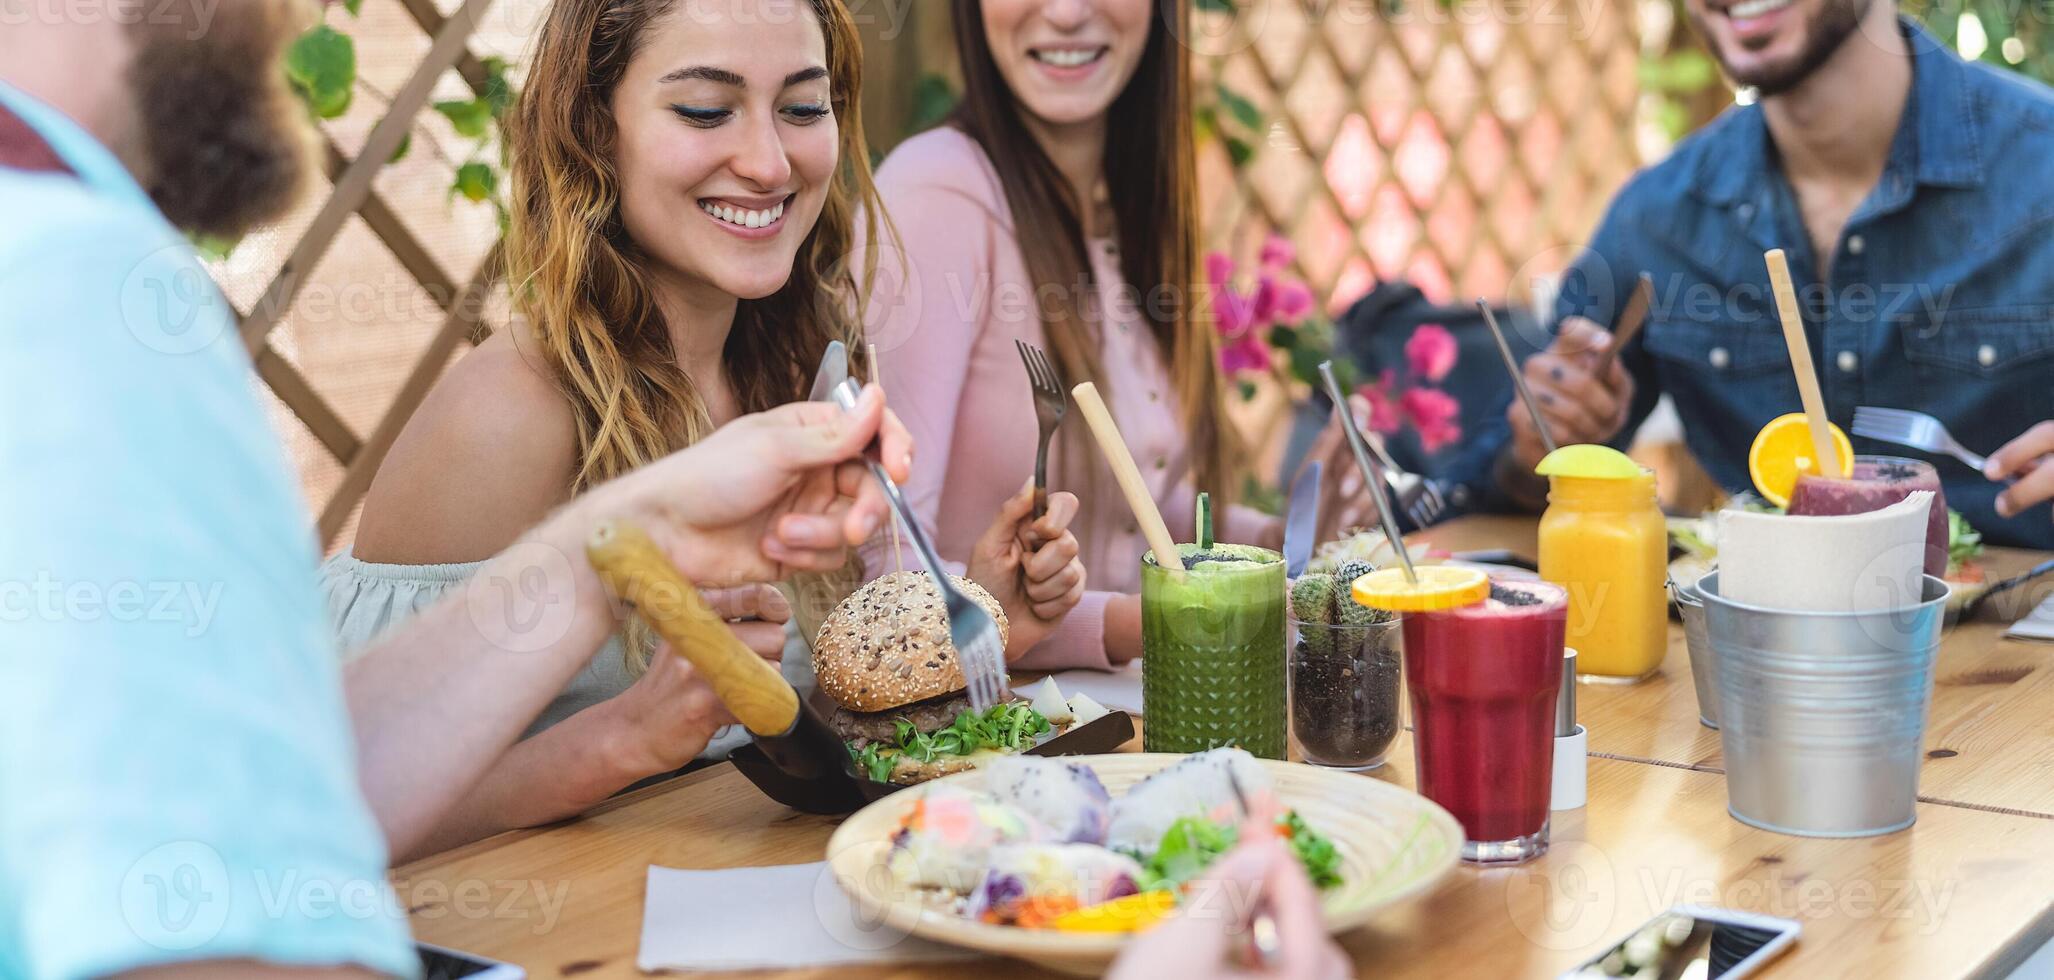 Happy friends lunching with healthy food in bar coffee brunch - Young people having fun eating meal and drinking smoothies fresh fruits in rustic restaurant - Health nutrition lifestyle concept photo